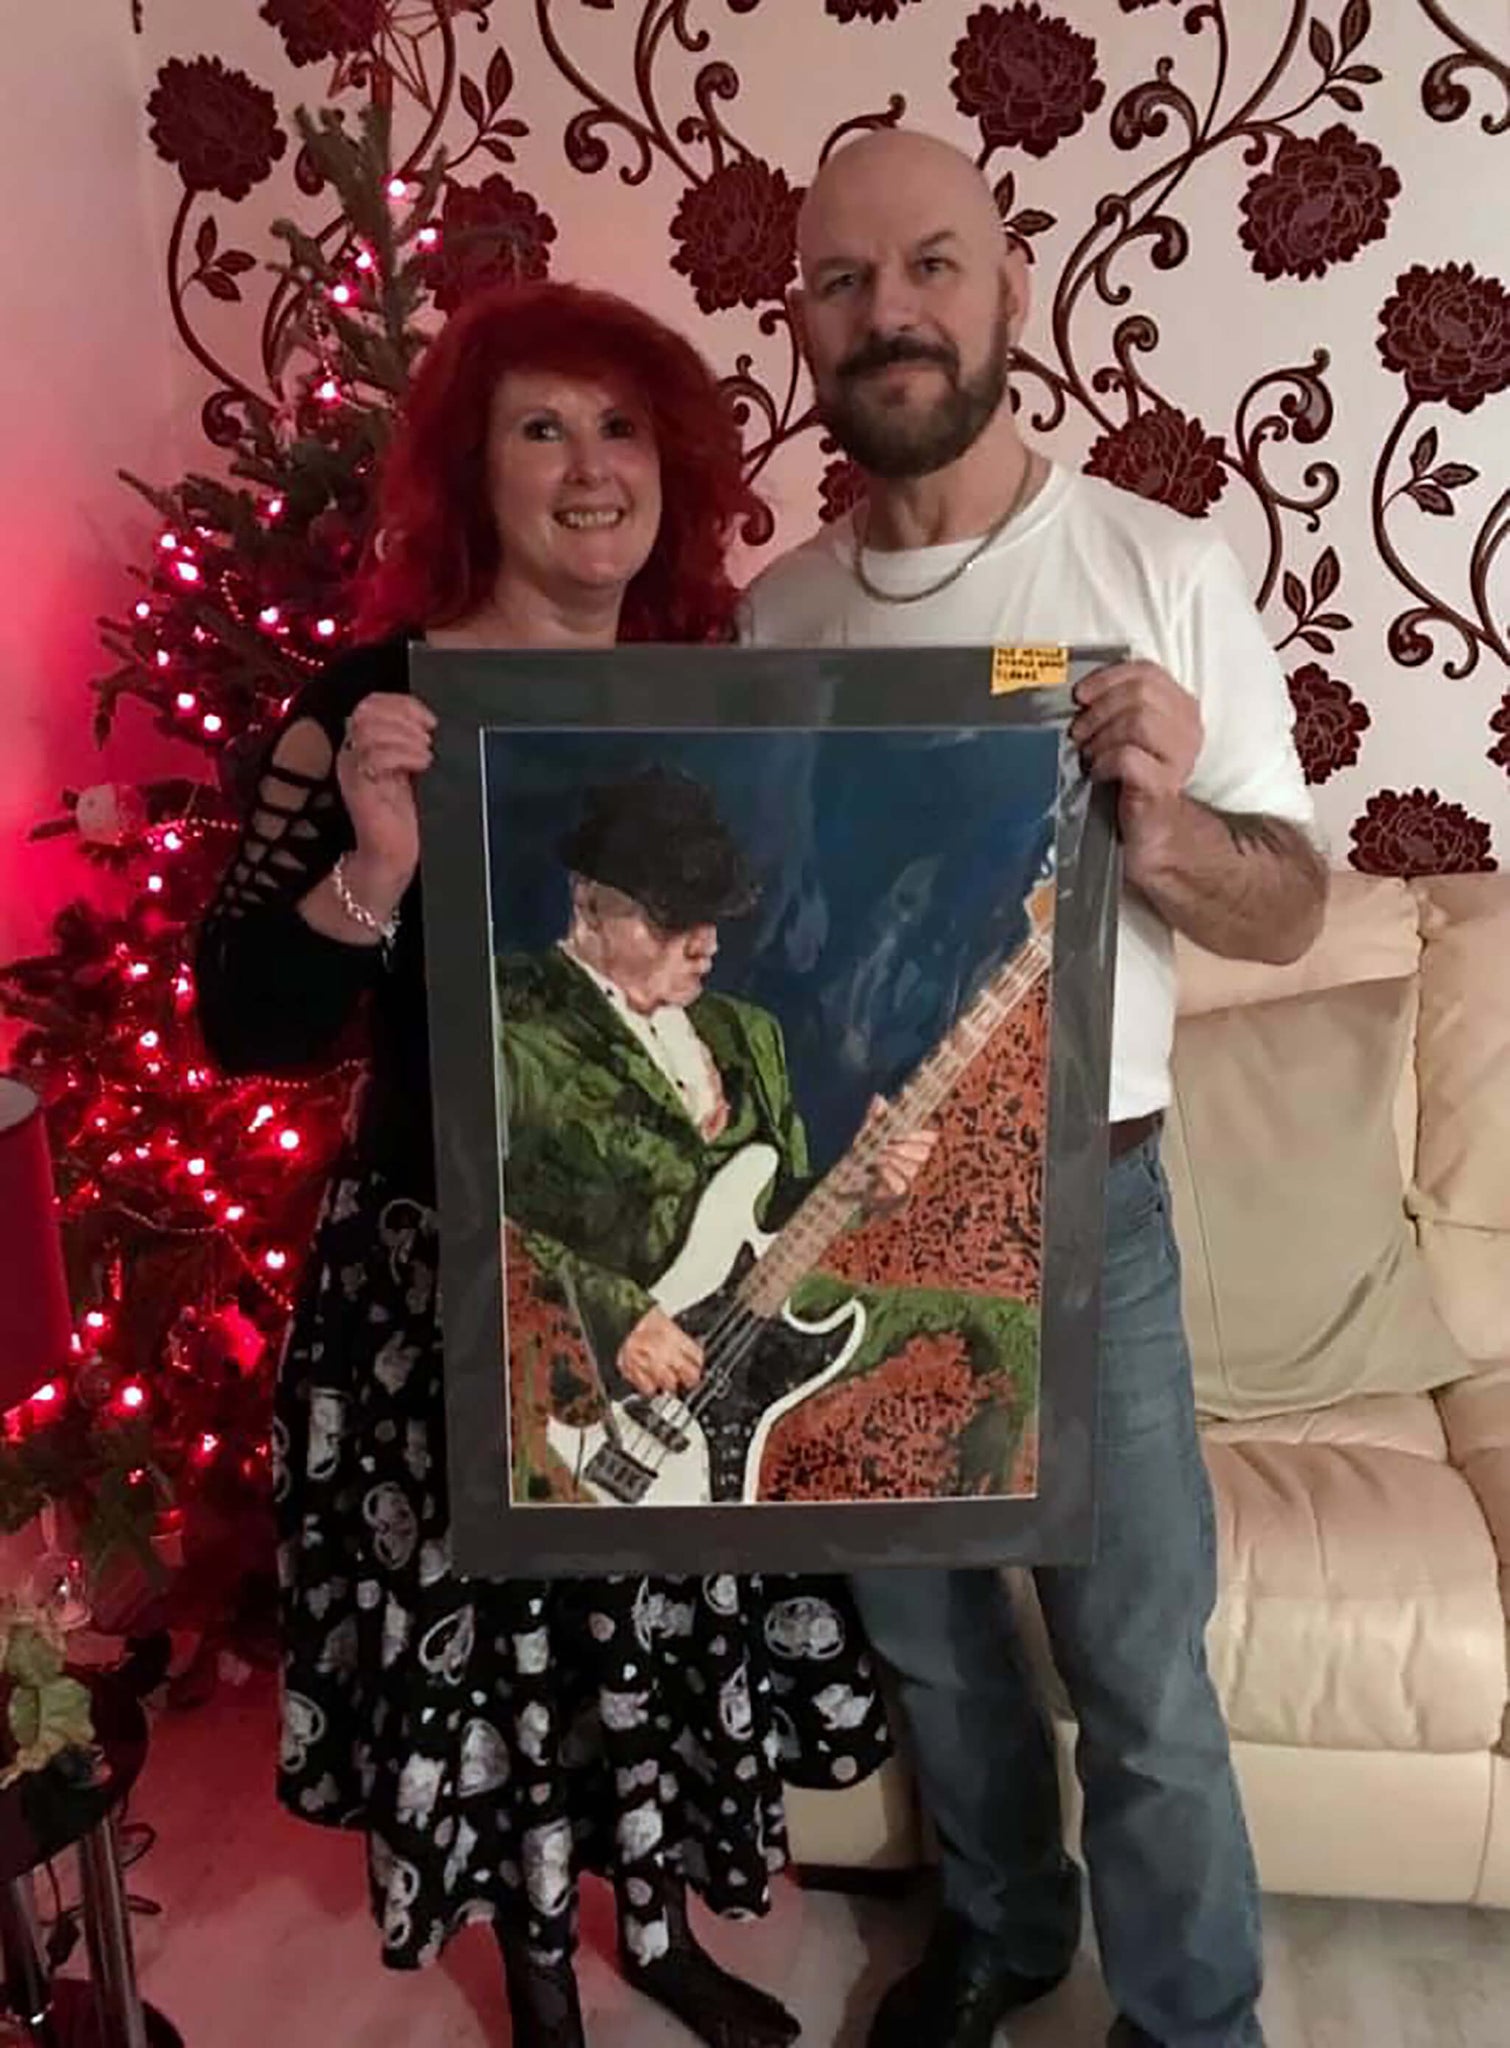 Neville Staple Band's Sledge and wife with Stella Tooth's portrait of him in action, her Christmas gift to him.